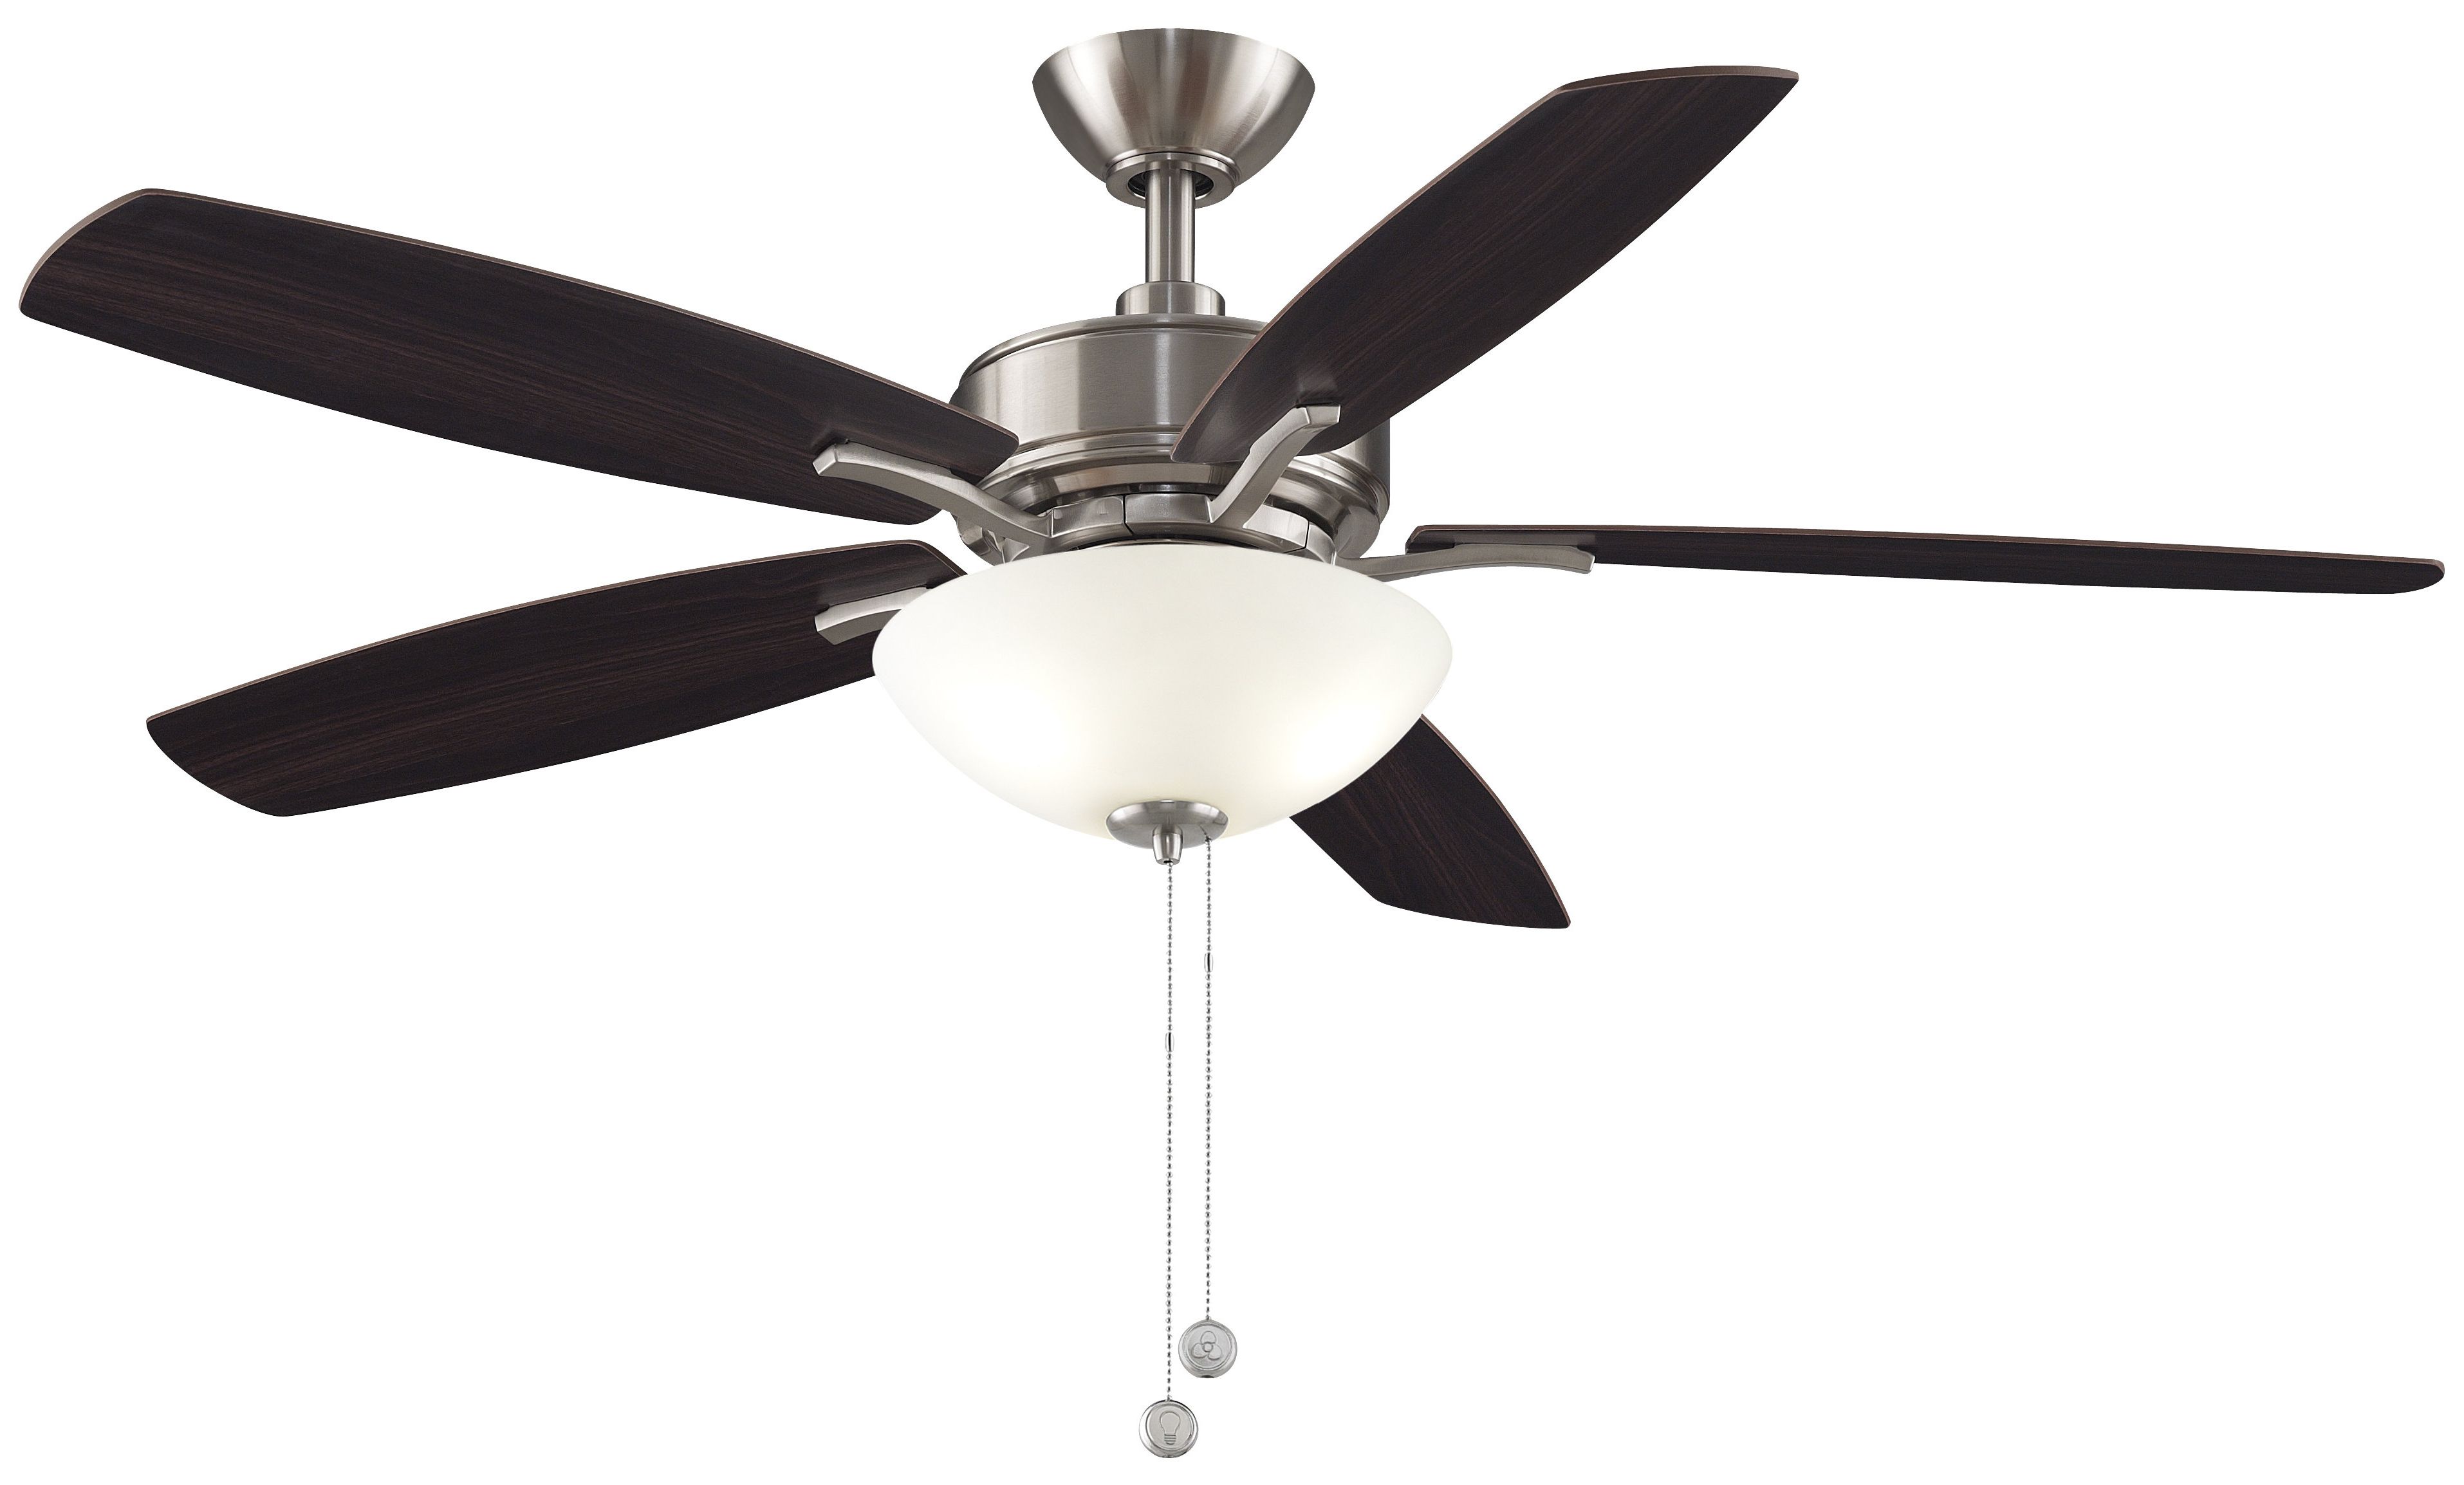 Ravello 5 Blade Led Ceiling Fans Pertaining To Well Known 52" Aire Deluxe 5 Blade Ceiling Fan (View 20 of 20)